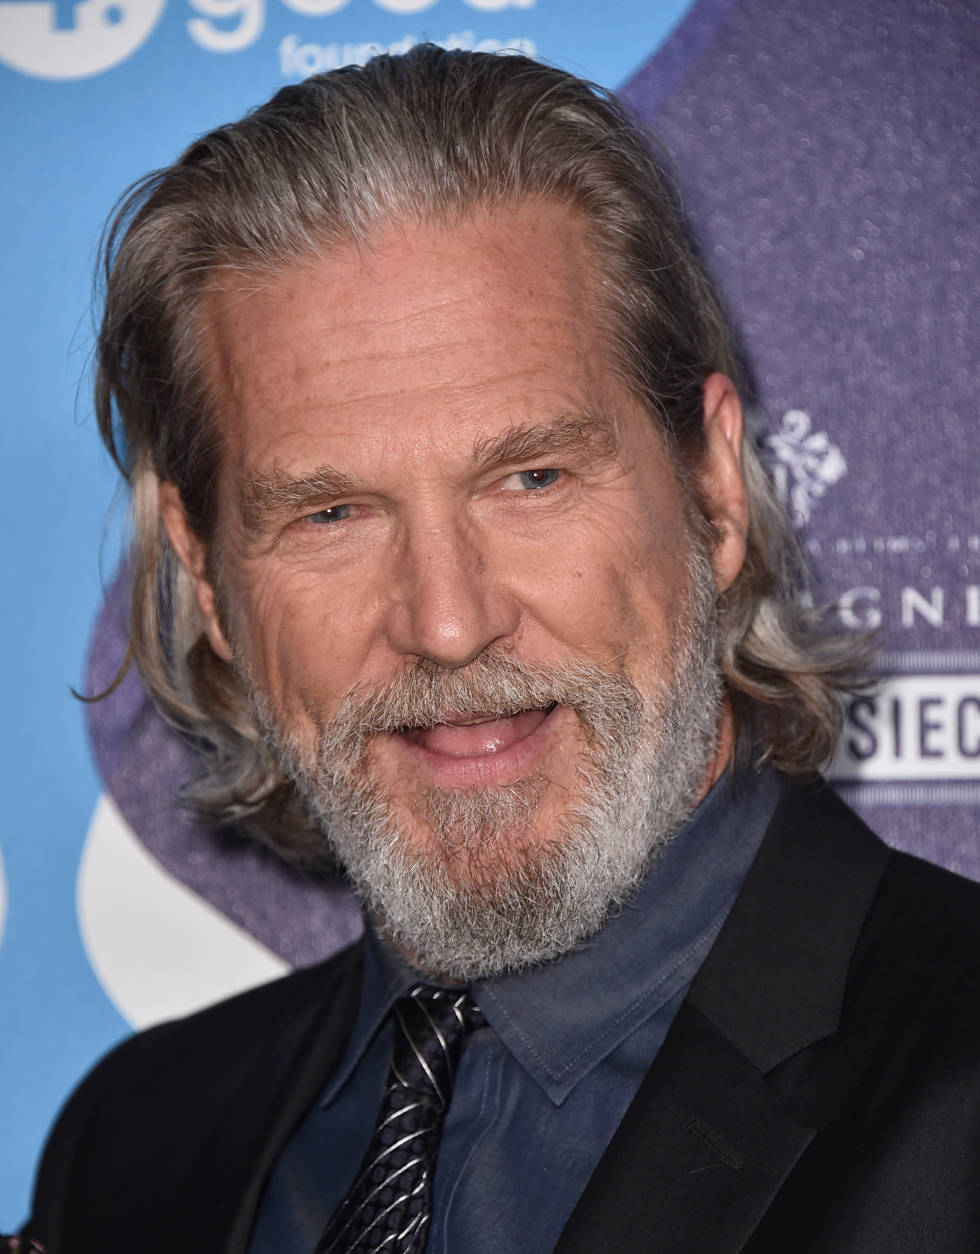 Jeff Bridges arrives at unite4:good and Variety's 2nd annual unite4:humanity at the Beverly Hilton Hotel on Thursday, Feb.19, 2015, in Beverly Hills, Calif.  (Photo by Jordan Strauss/Invision/AP)